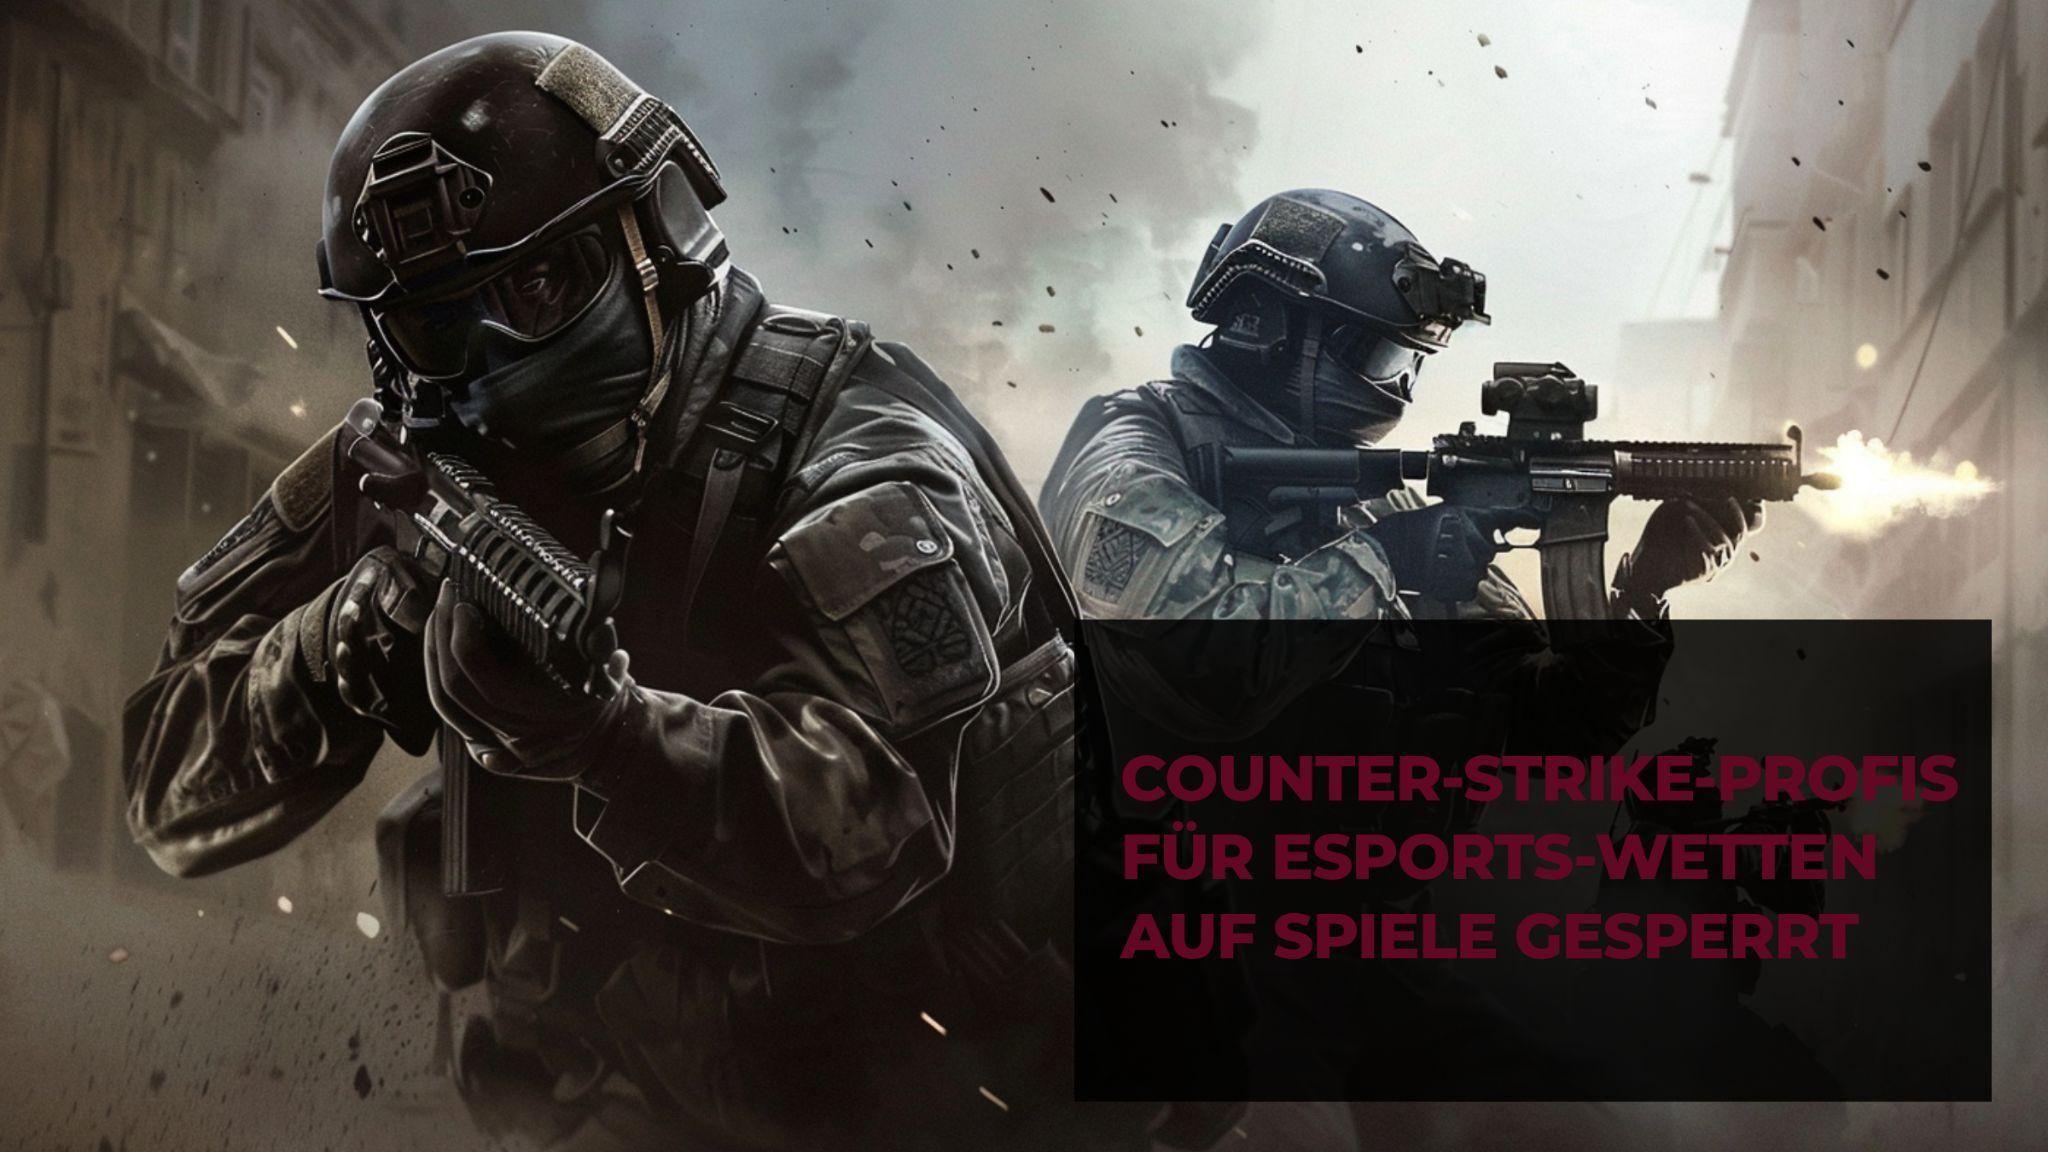 Counter-Strike pros banned from betting on ESports matches